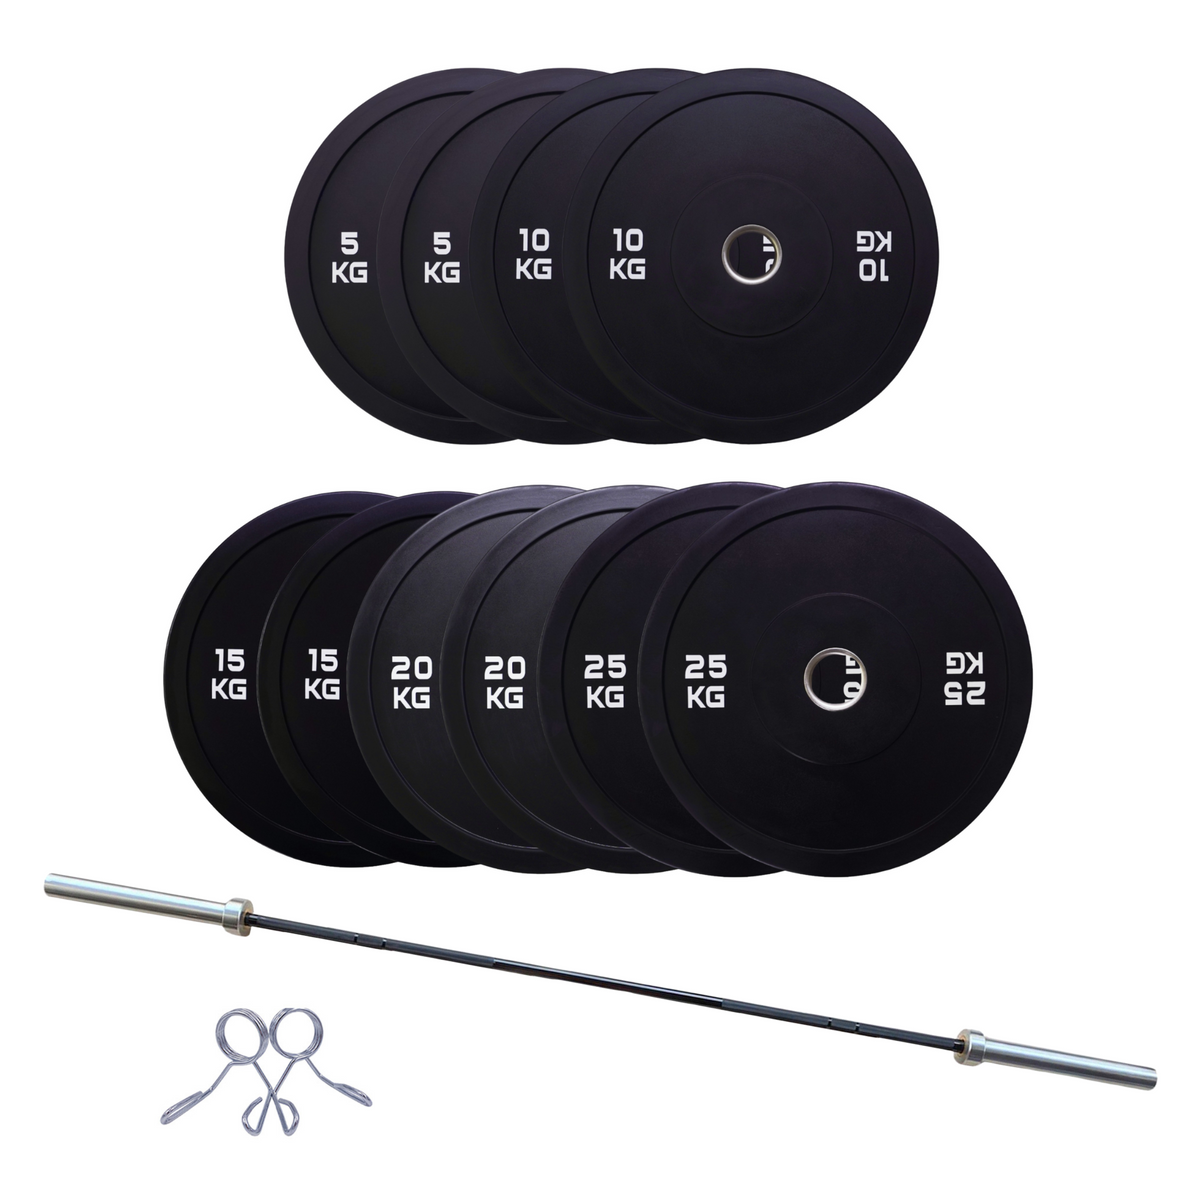 150kg Black Bumper Plates V2 and 2.2m Olympic Barbell Package